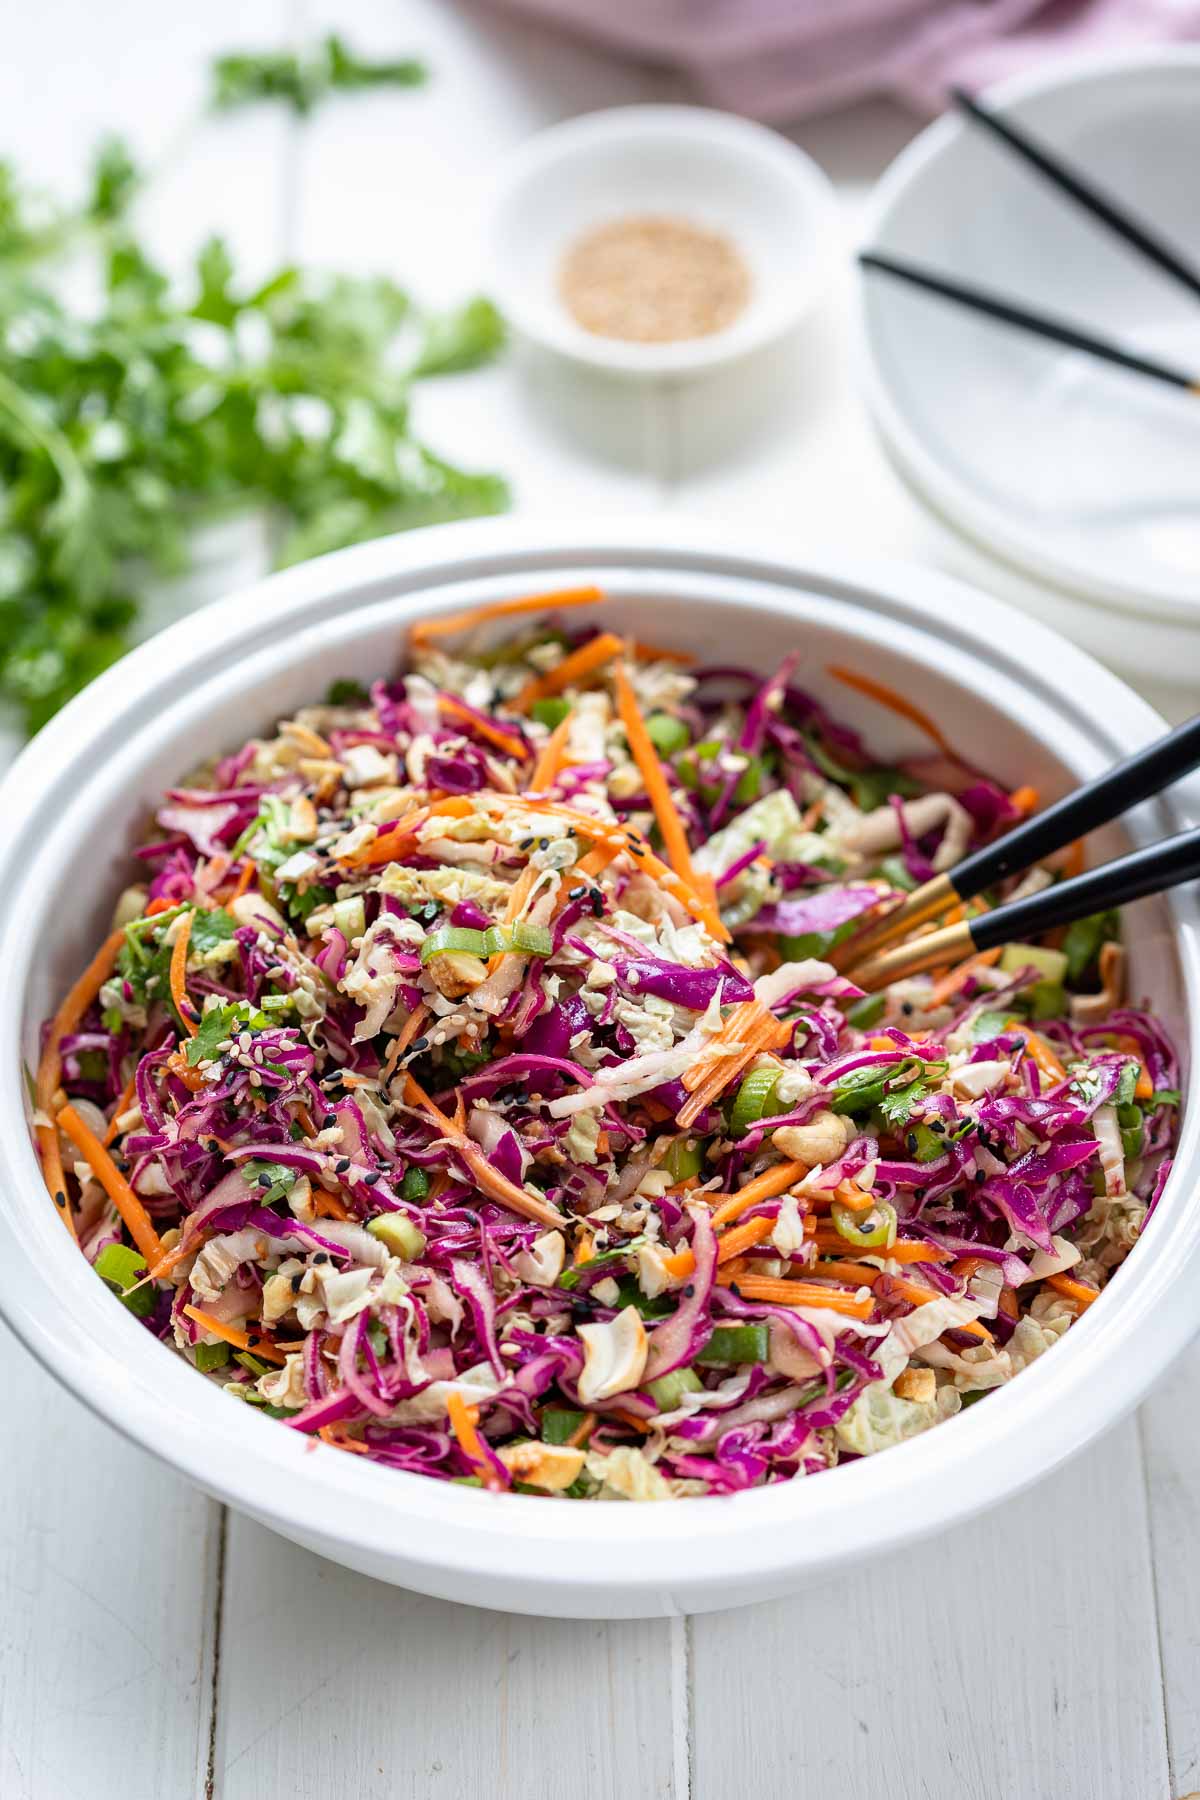 Asian Coleslaw with red and white cabbage, carrot, spring onions and cilantro